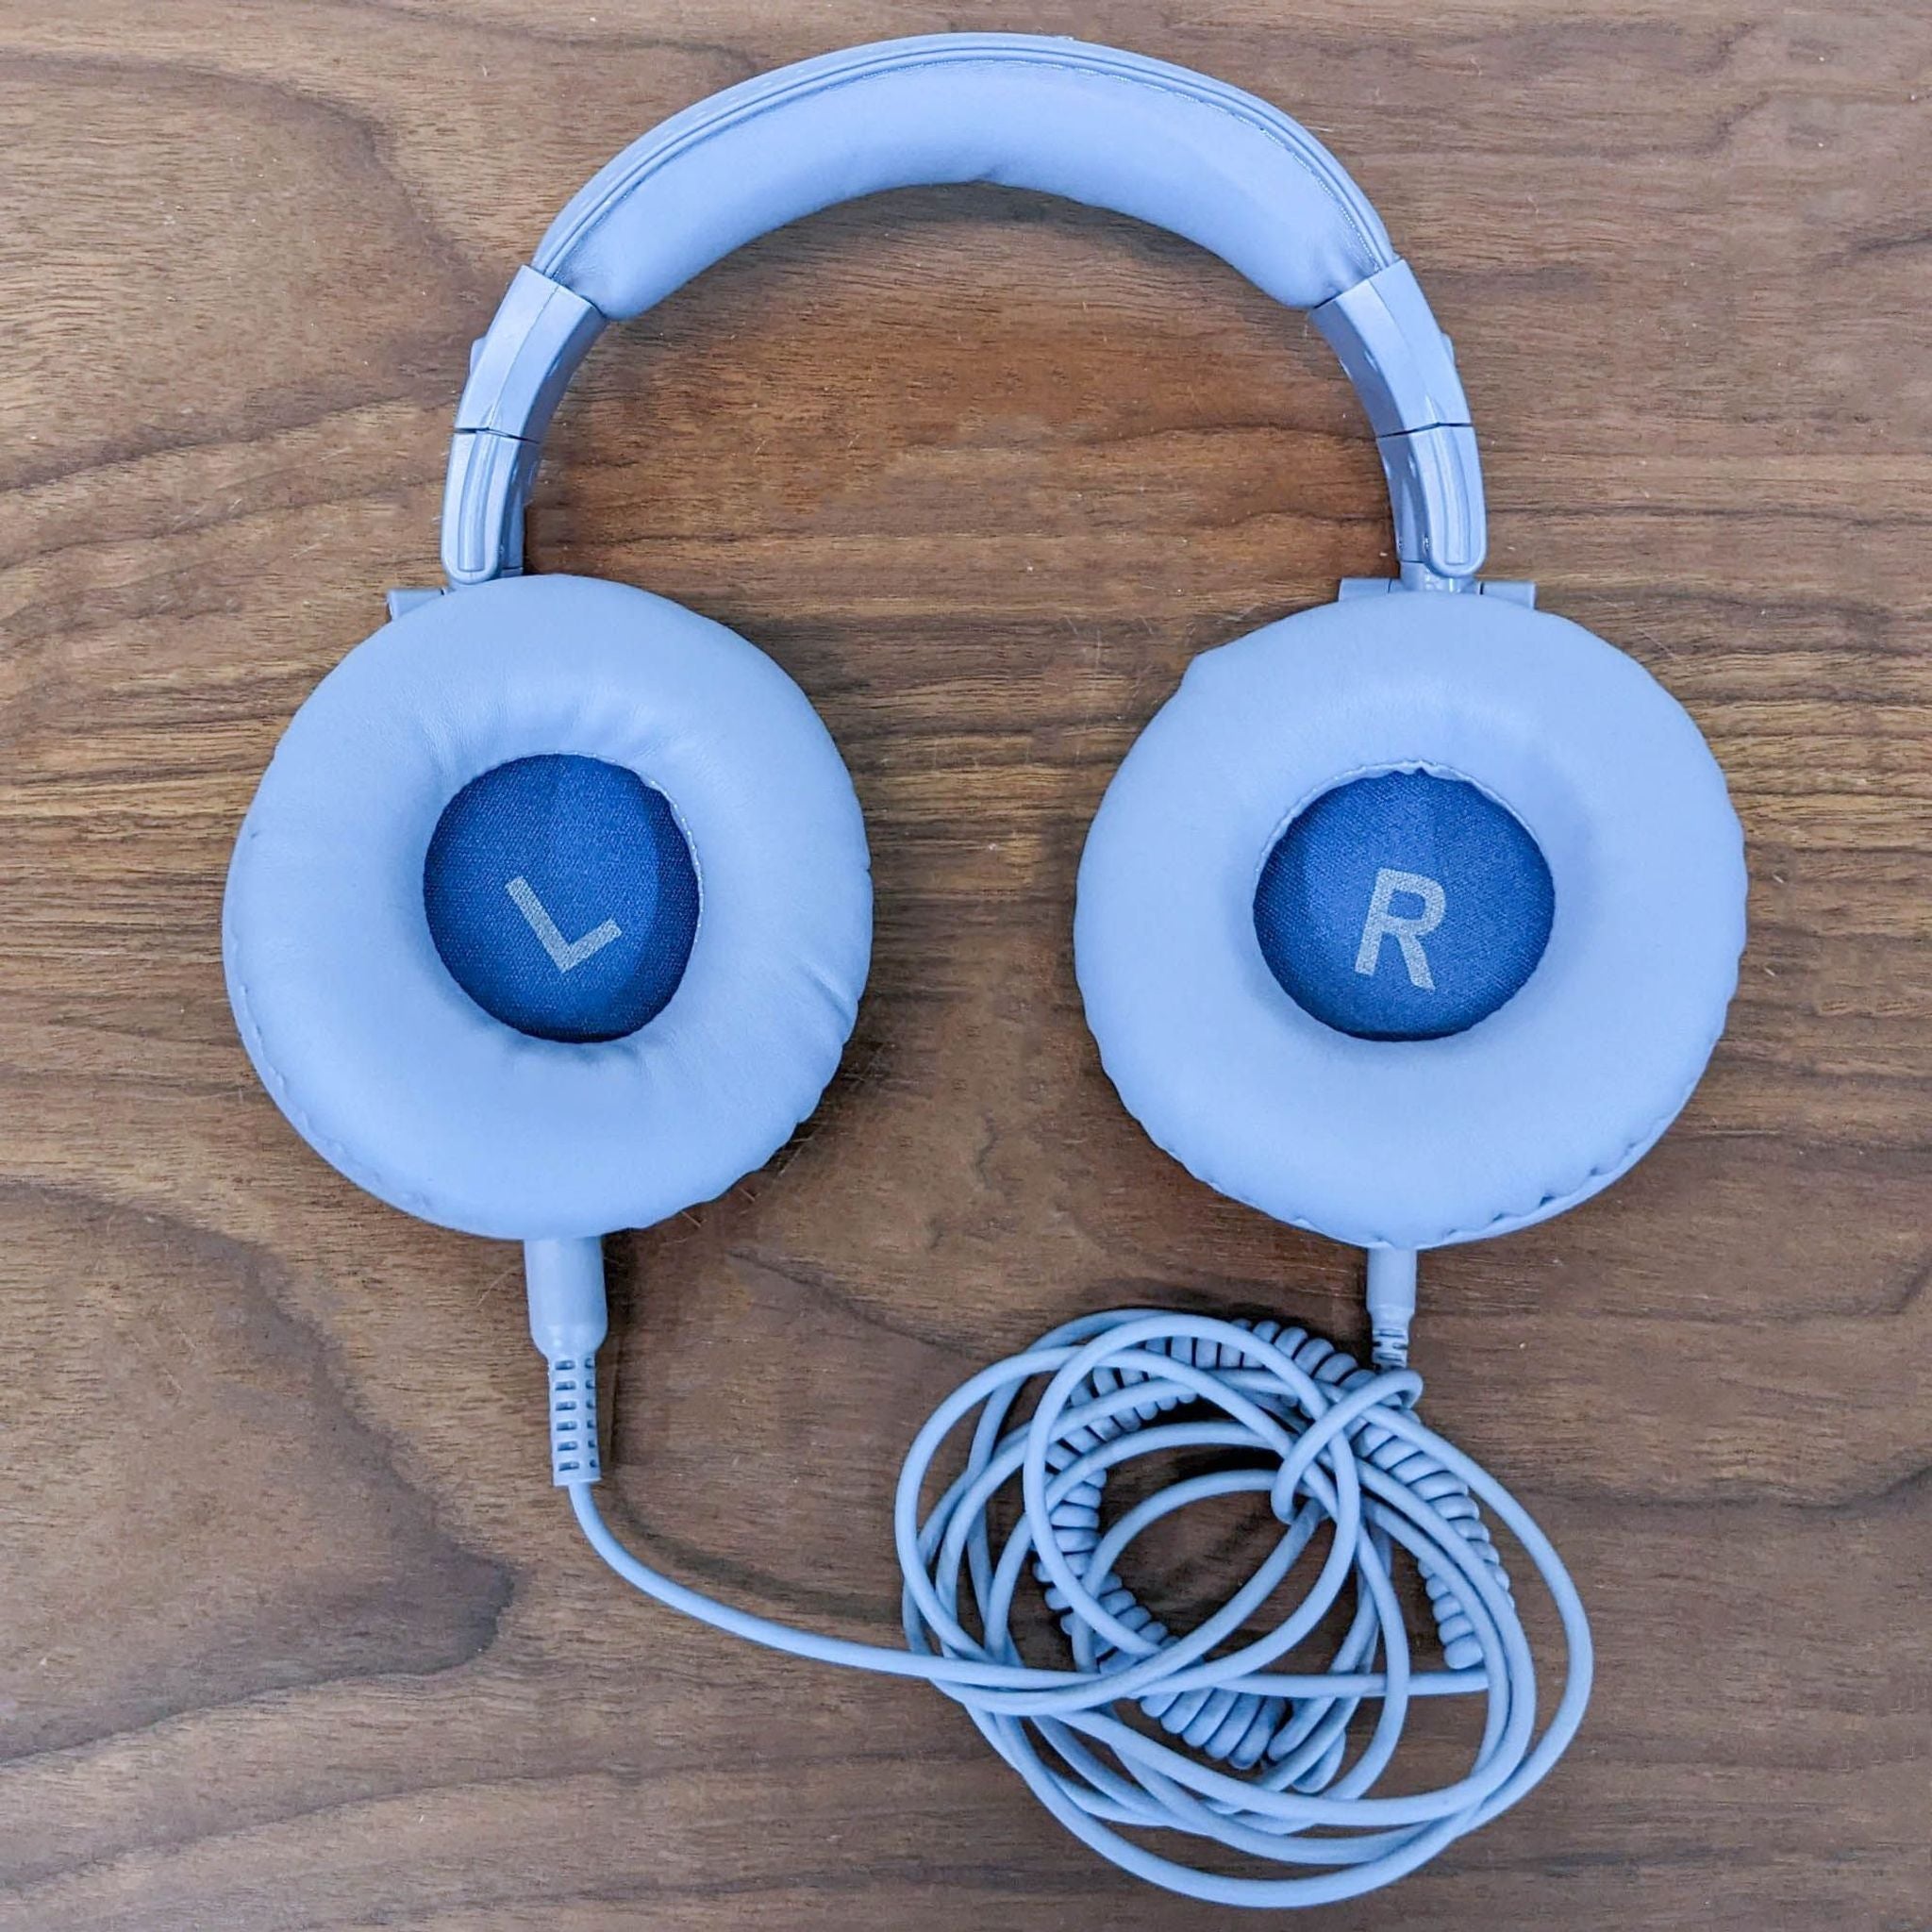 OneOdio over-ear headphones in white with "L" and "R" indicators, coiled cable on a wooden surface.